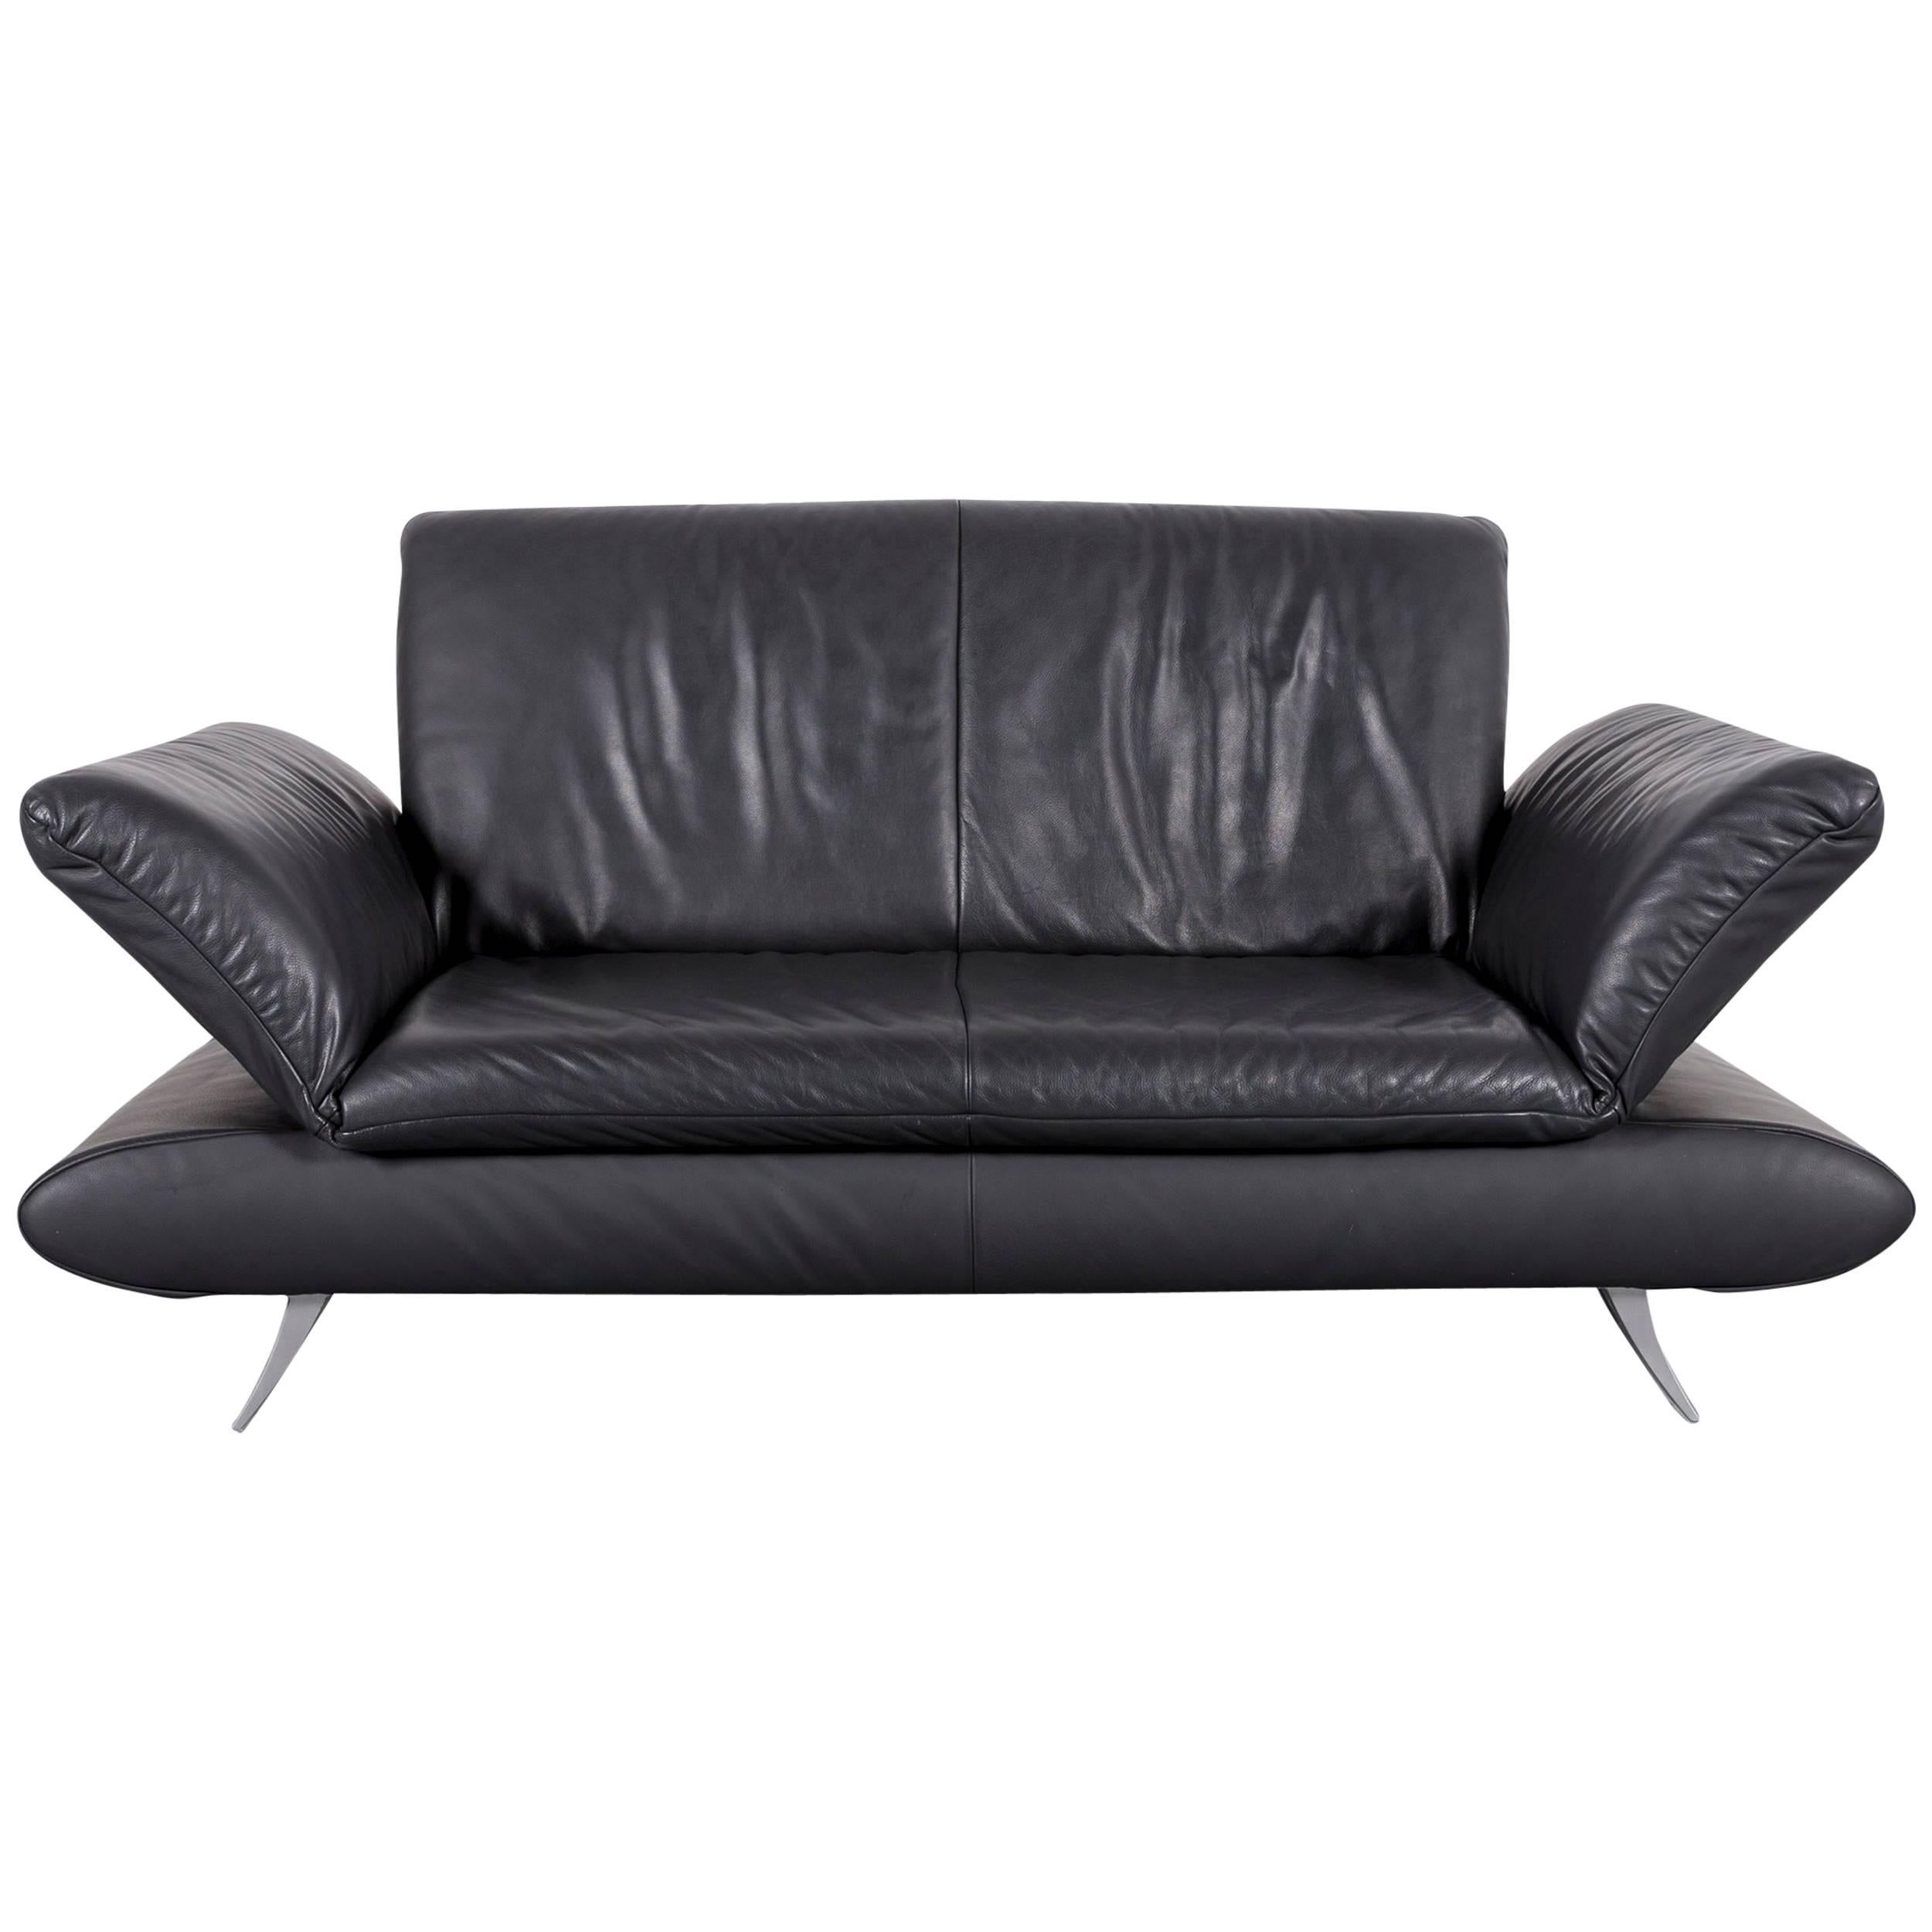 Koinor Rossini Designer Leather Sofa in Grey with Functions Two-Seat